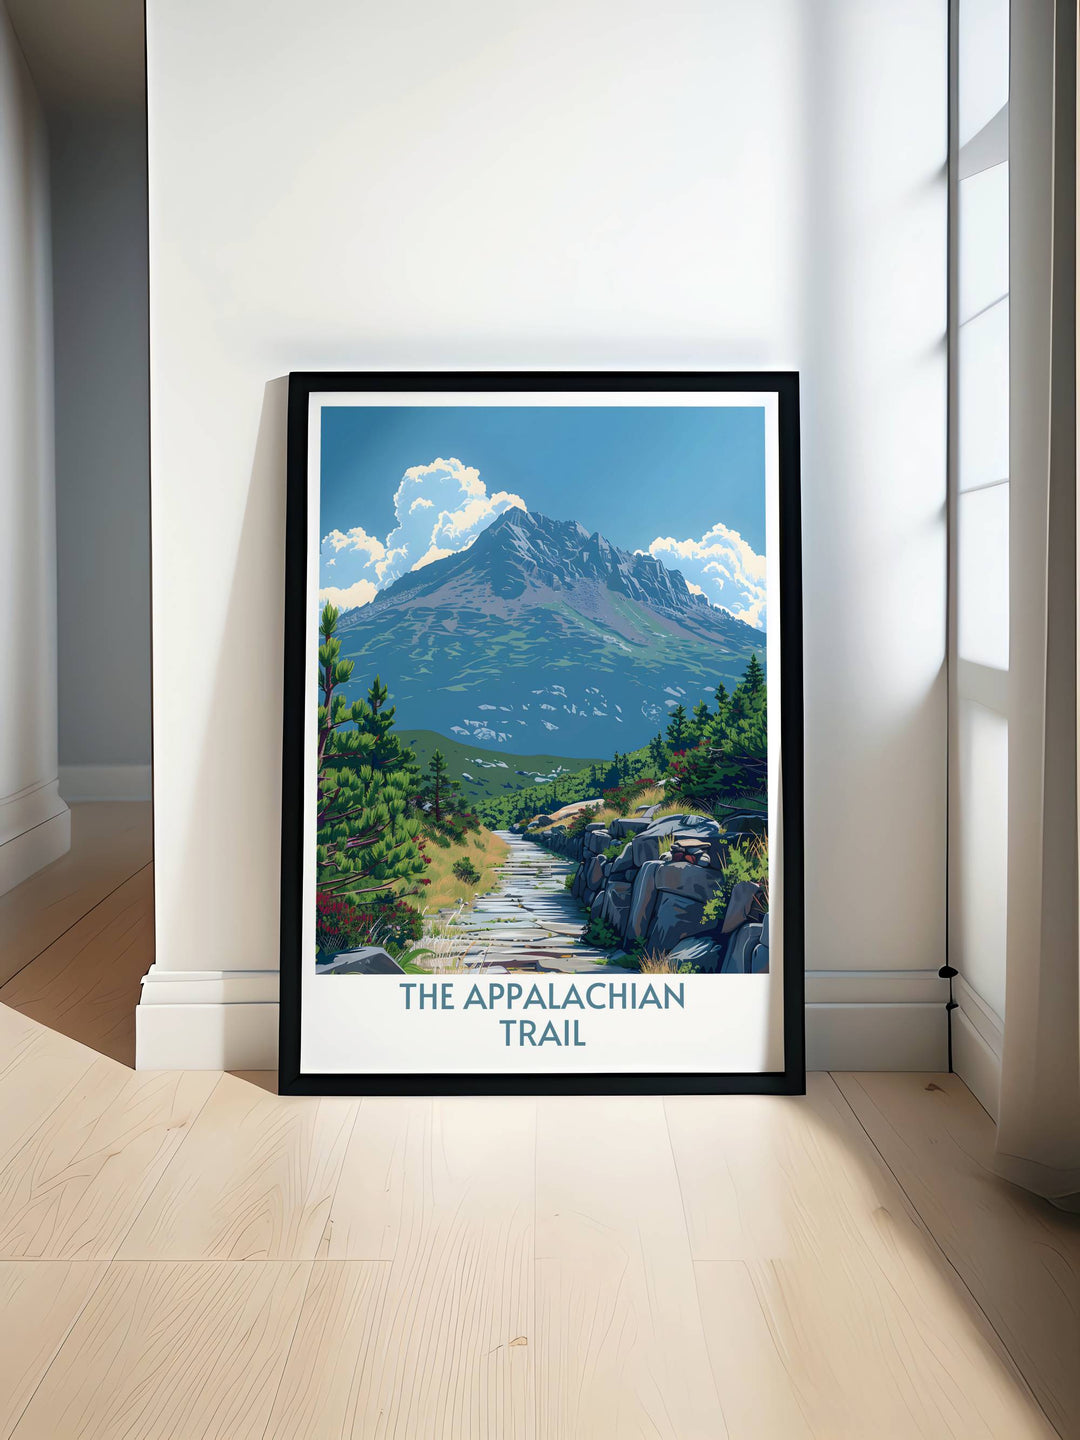 Mount Katahdin captured in a serene and pristine print, ideal for adding a touch of calm to any indoor setting.